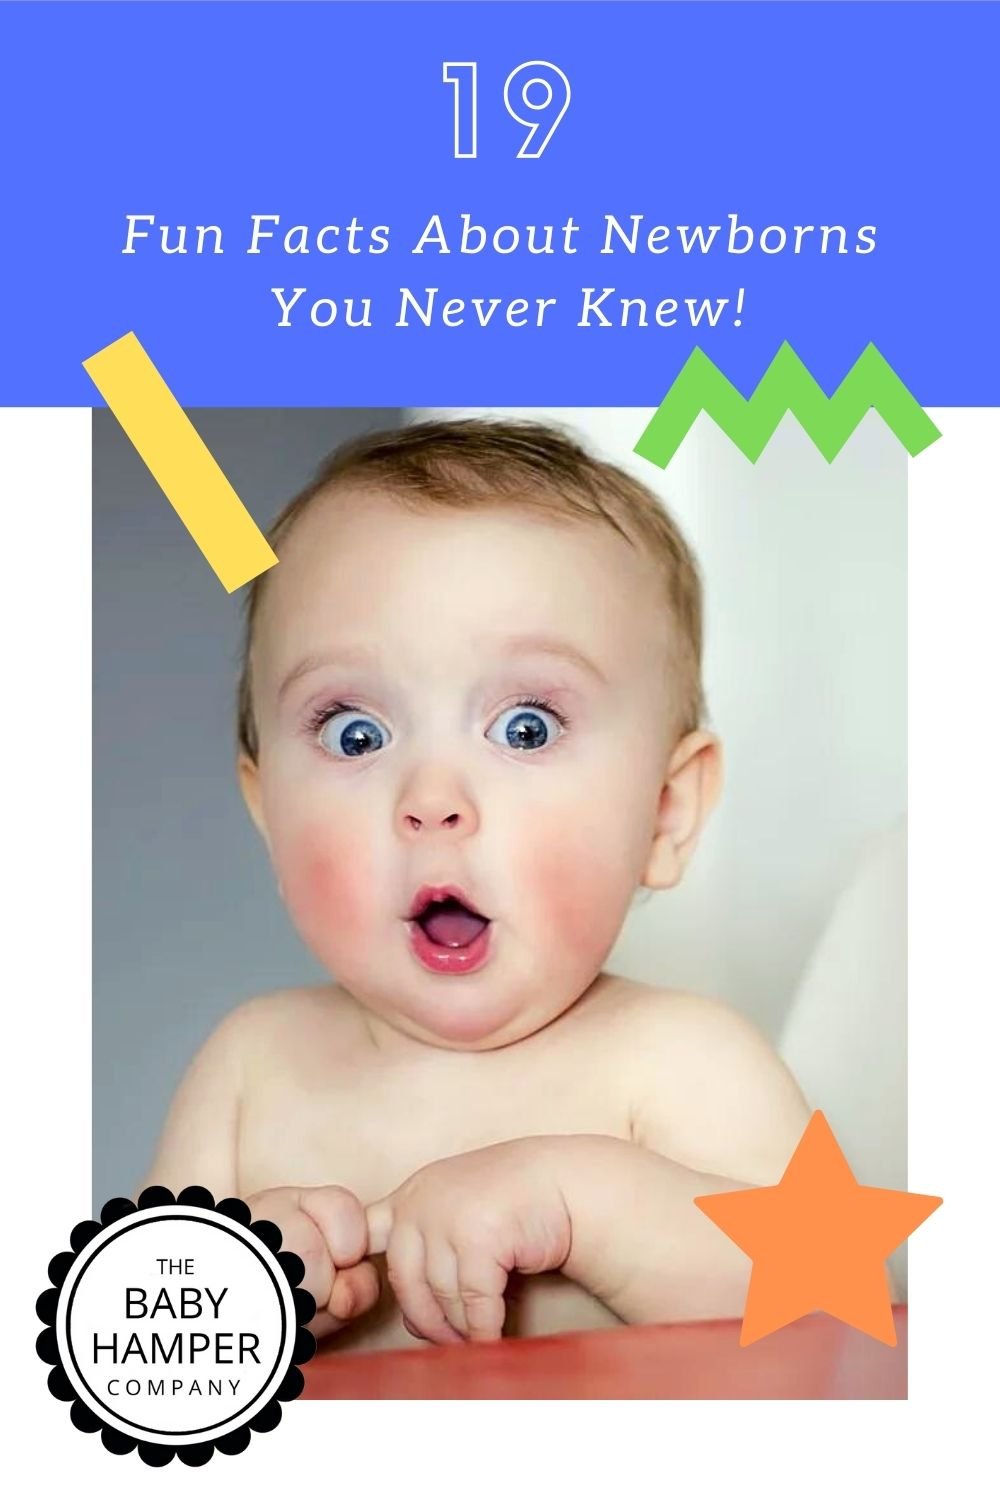 19 Fun Facts About Newborns You Never Knew (1)